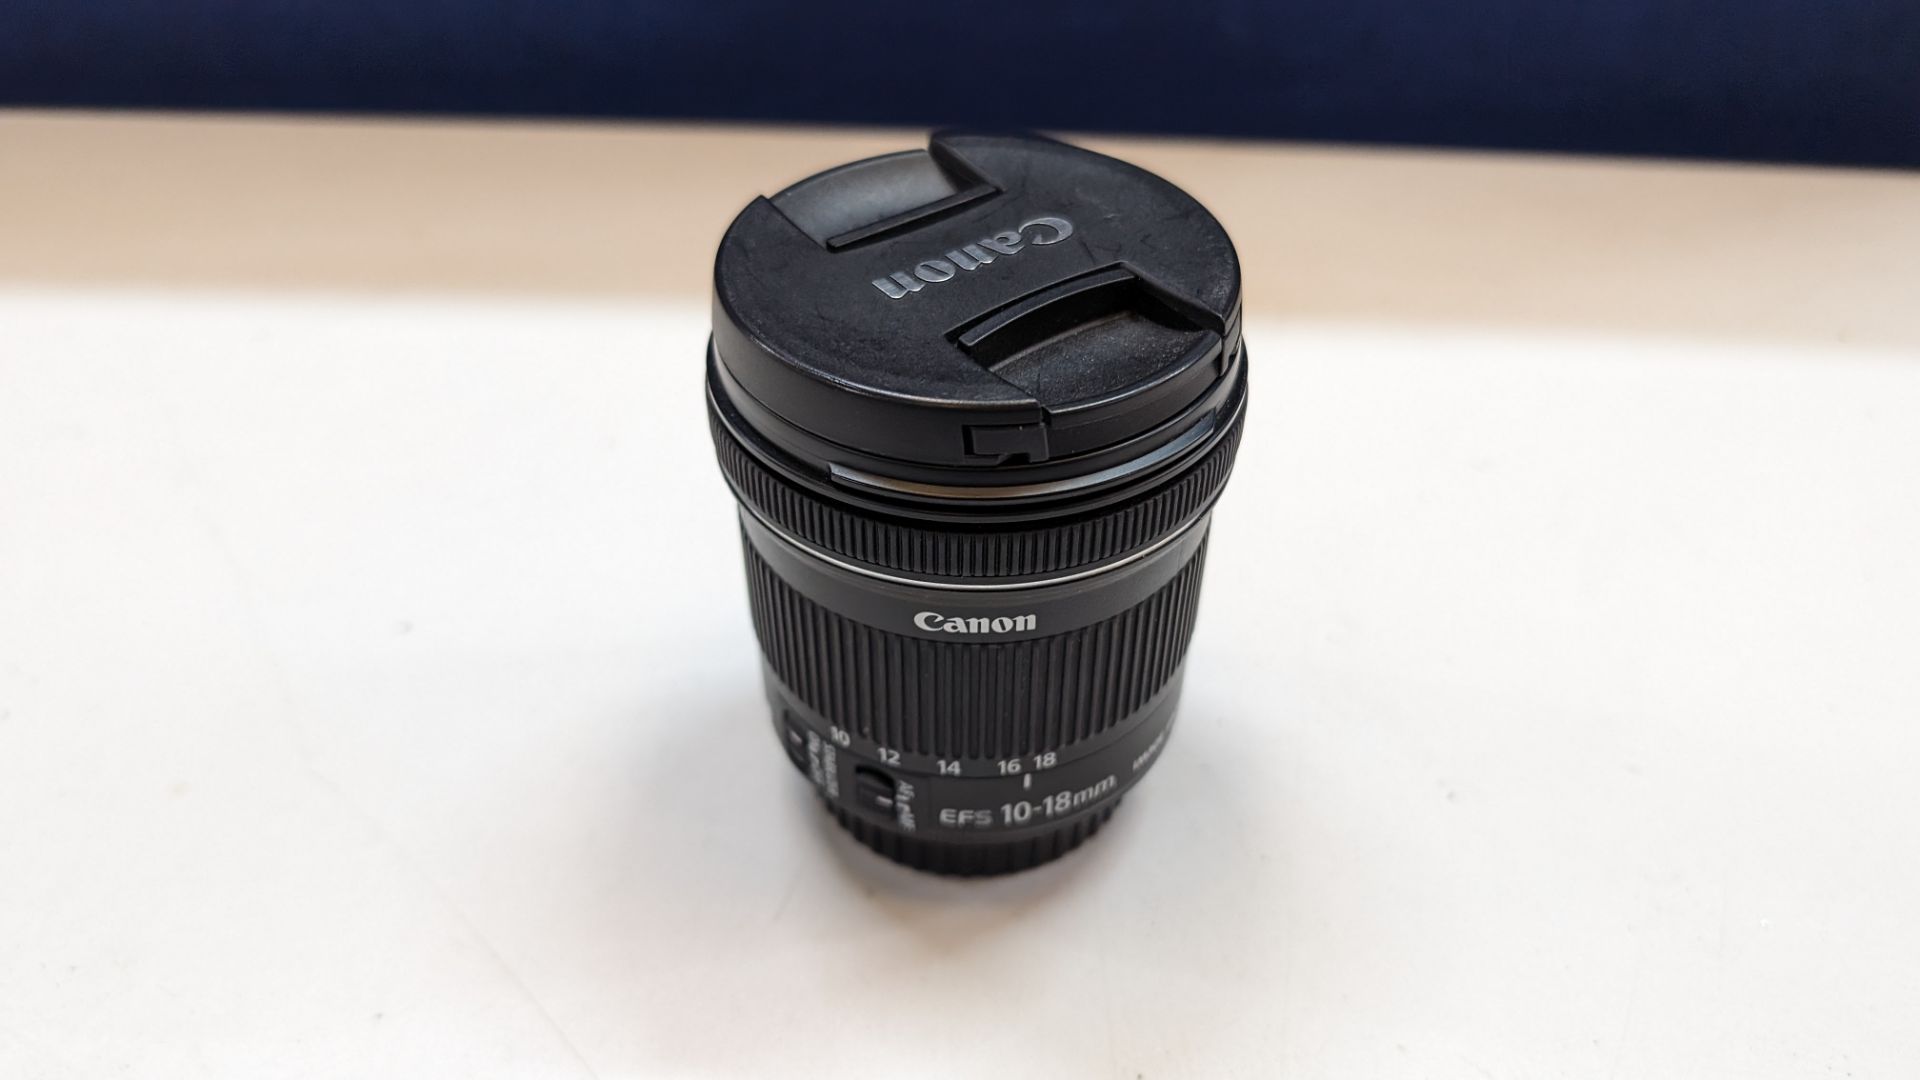 Canon EFS 10-18mm lens - Image 3 of 13